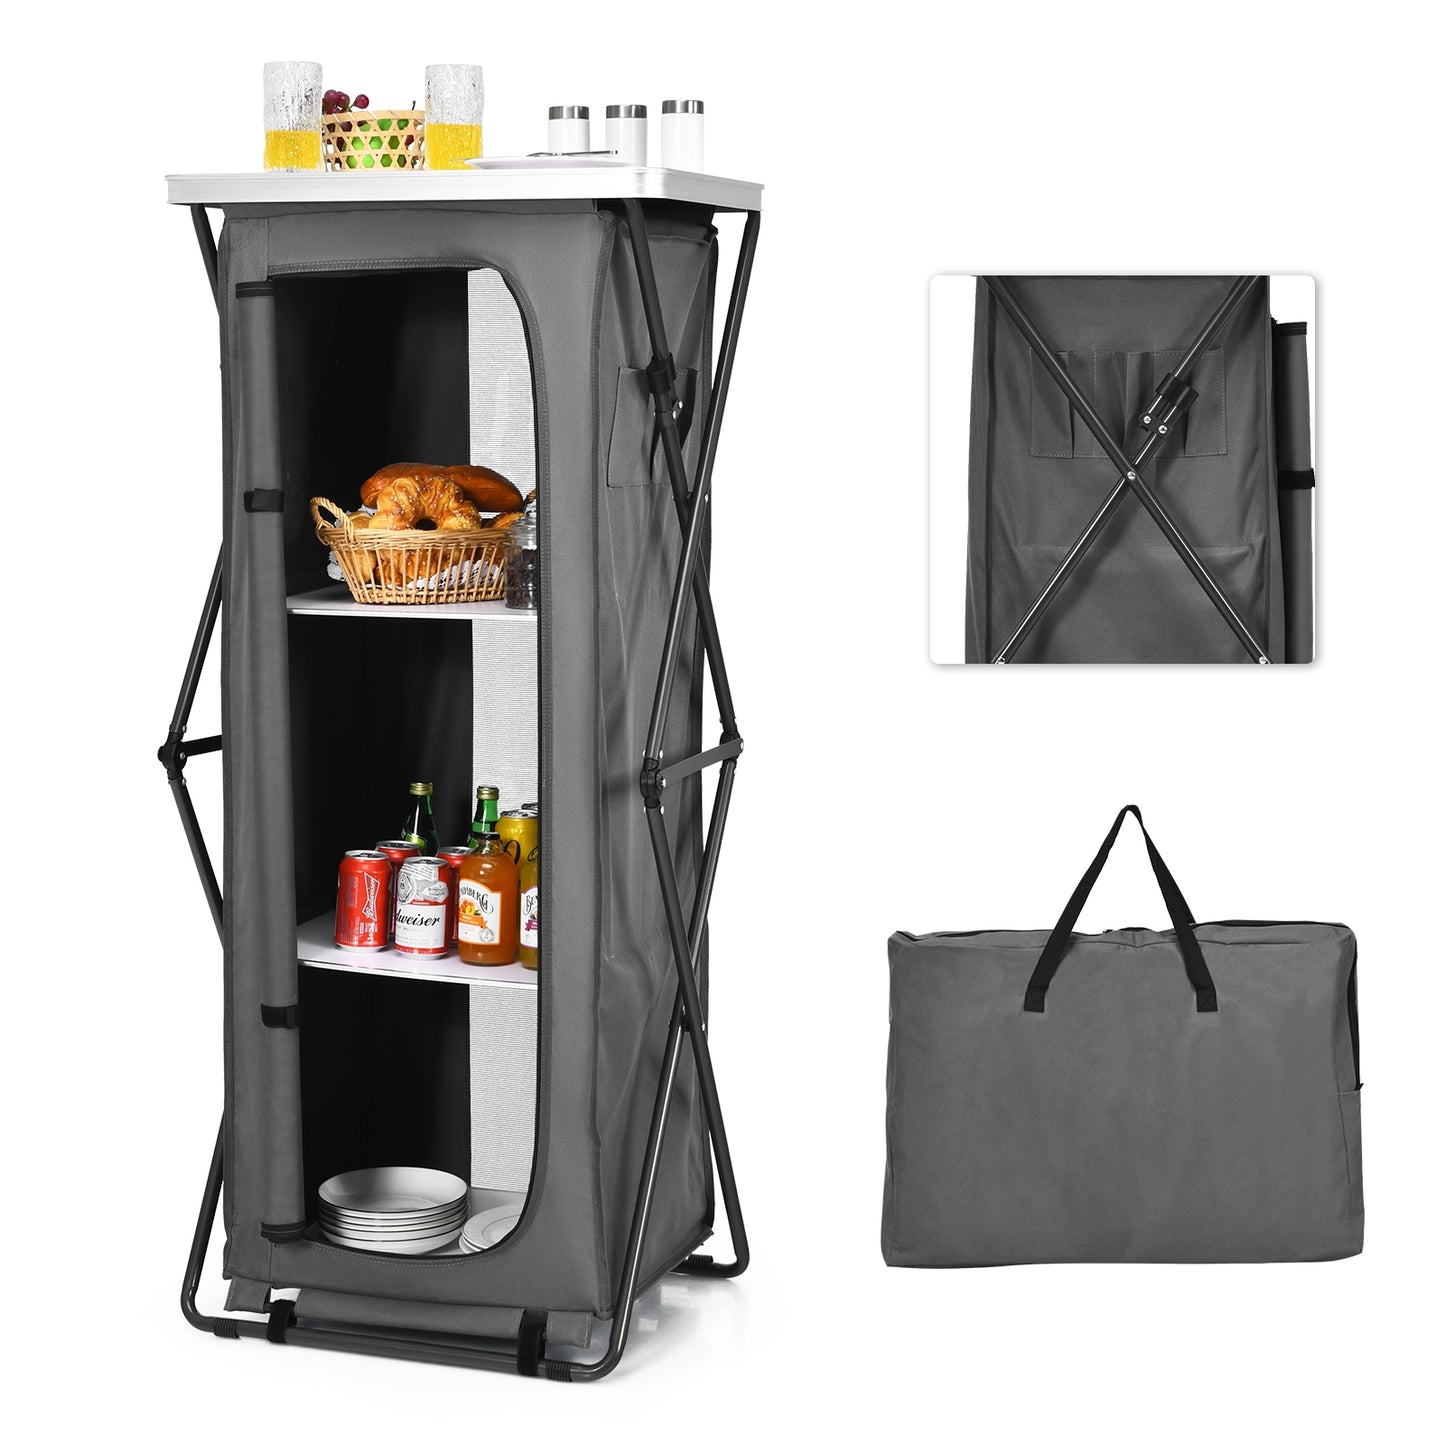 Folding Pop-Up Cupboard Compact Camping Storage Cabinet with Bag-XL